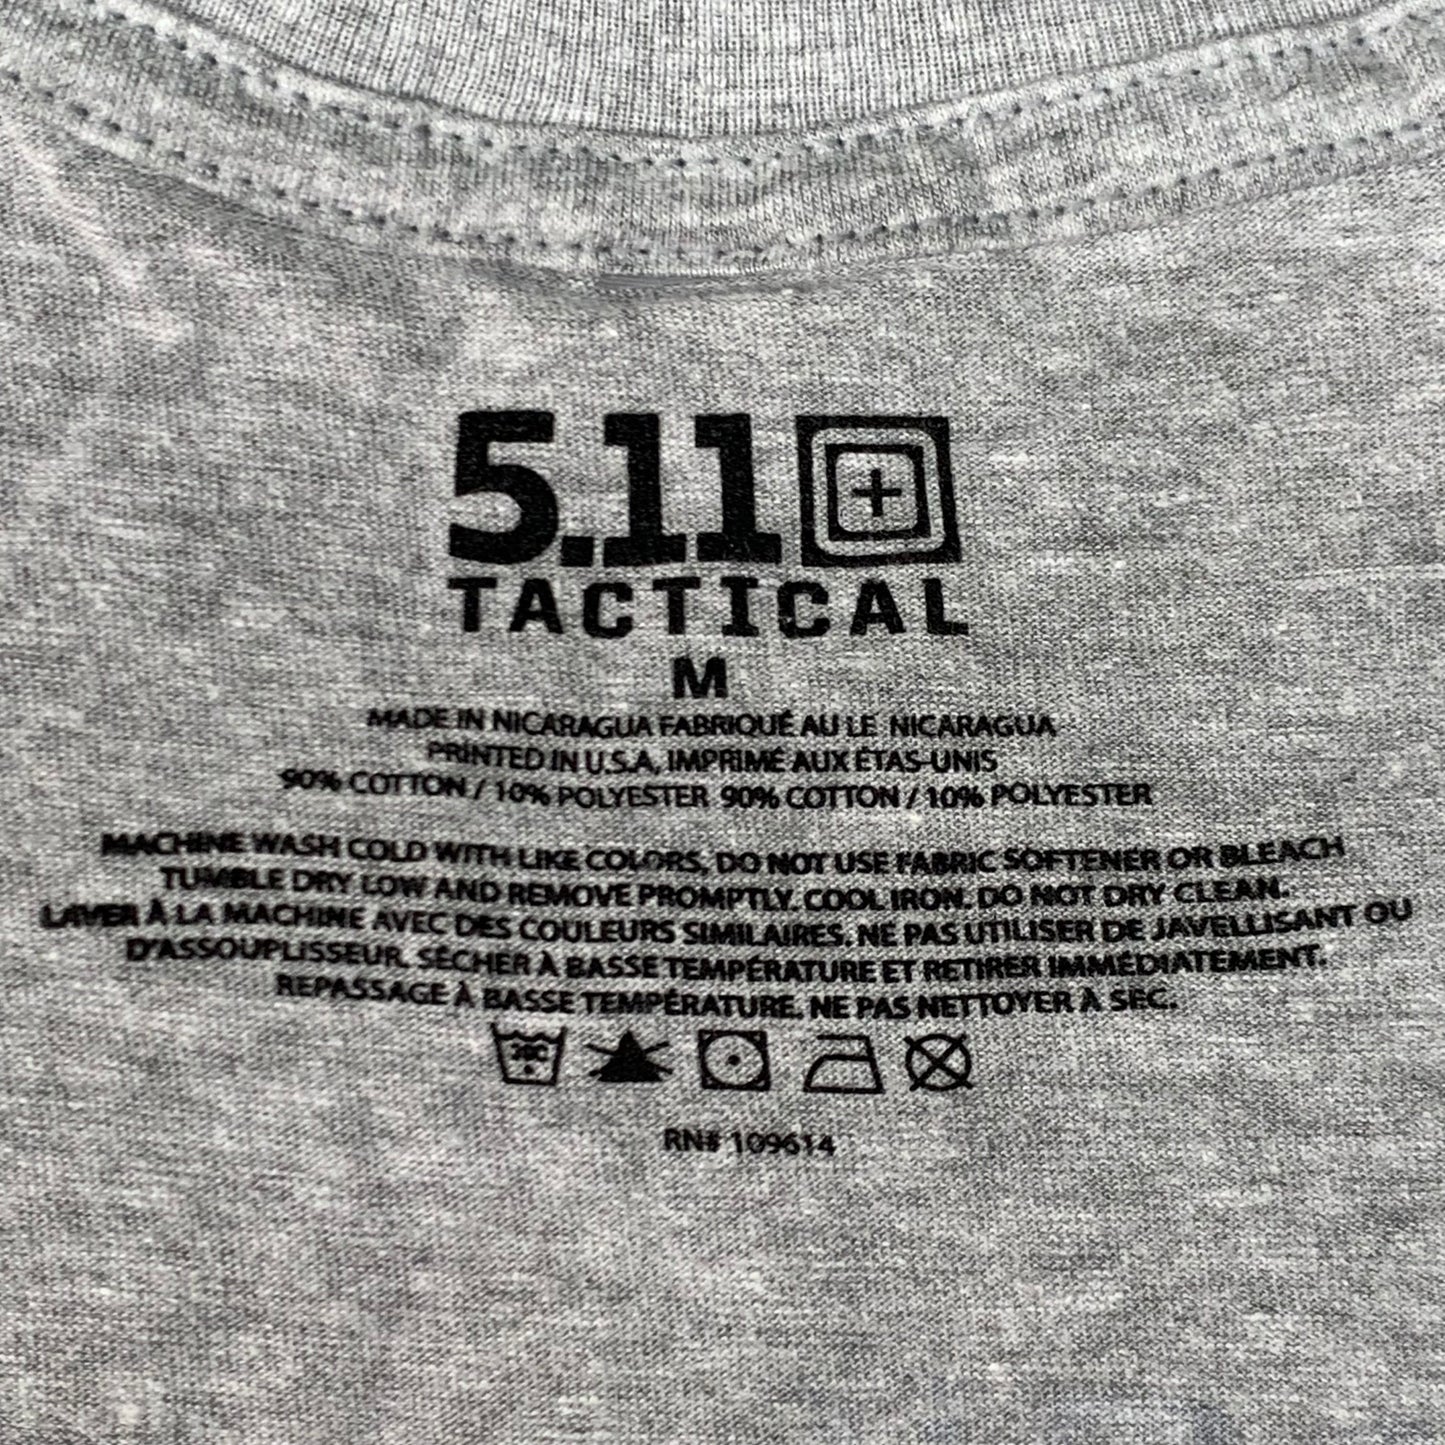 5.11 TACTICAL All Bark All Bite T-Shirt Cotton Polyester 016 Heather Grey Sz M #76330